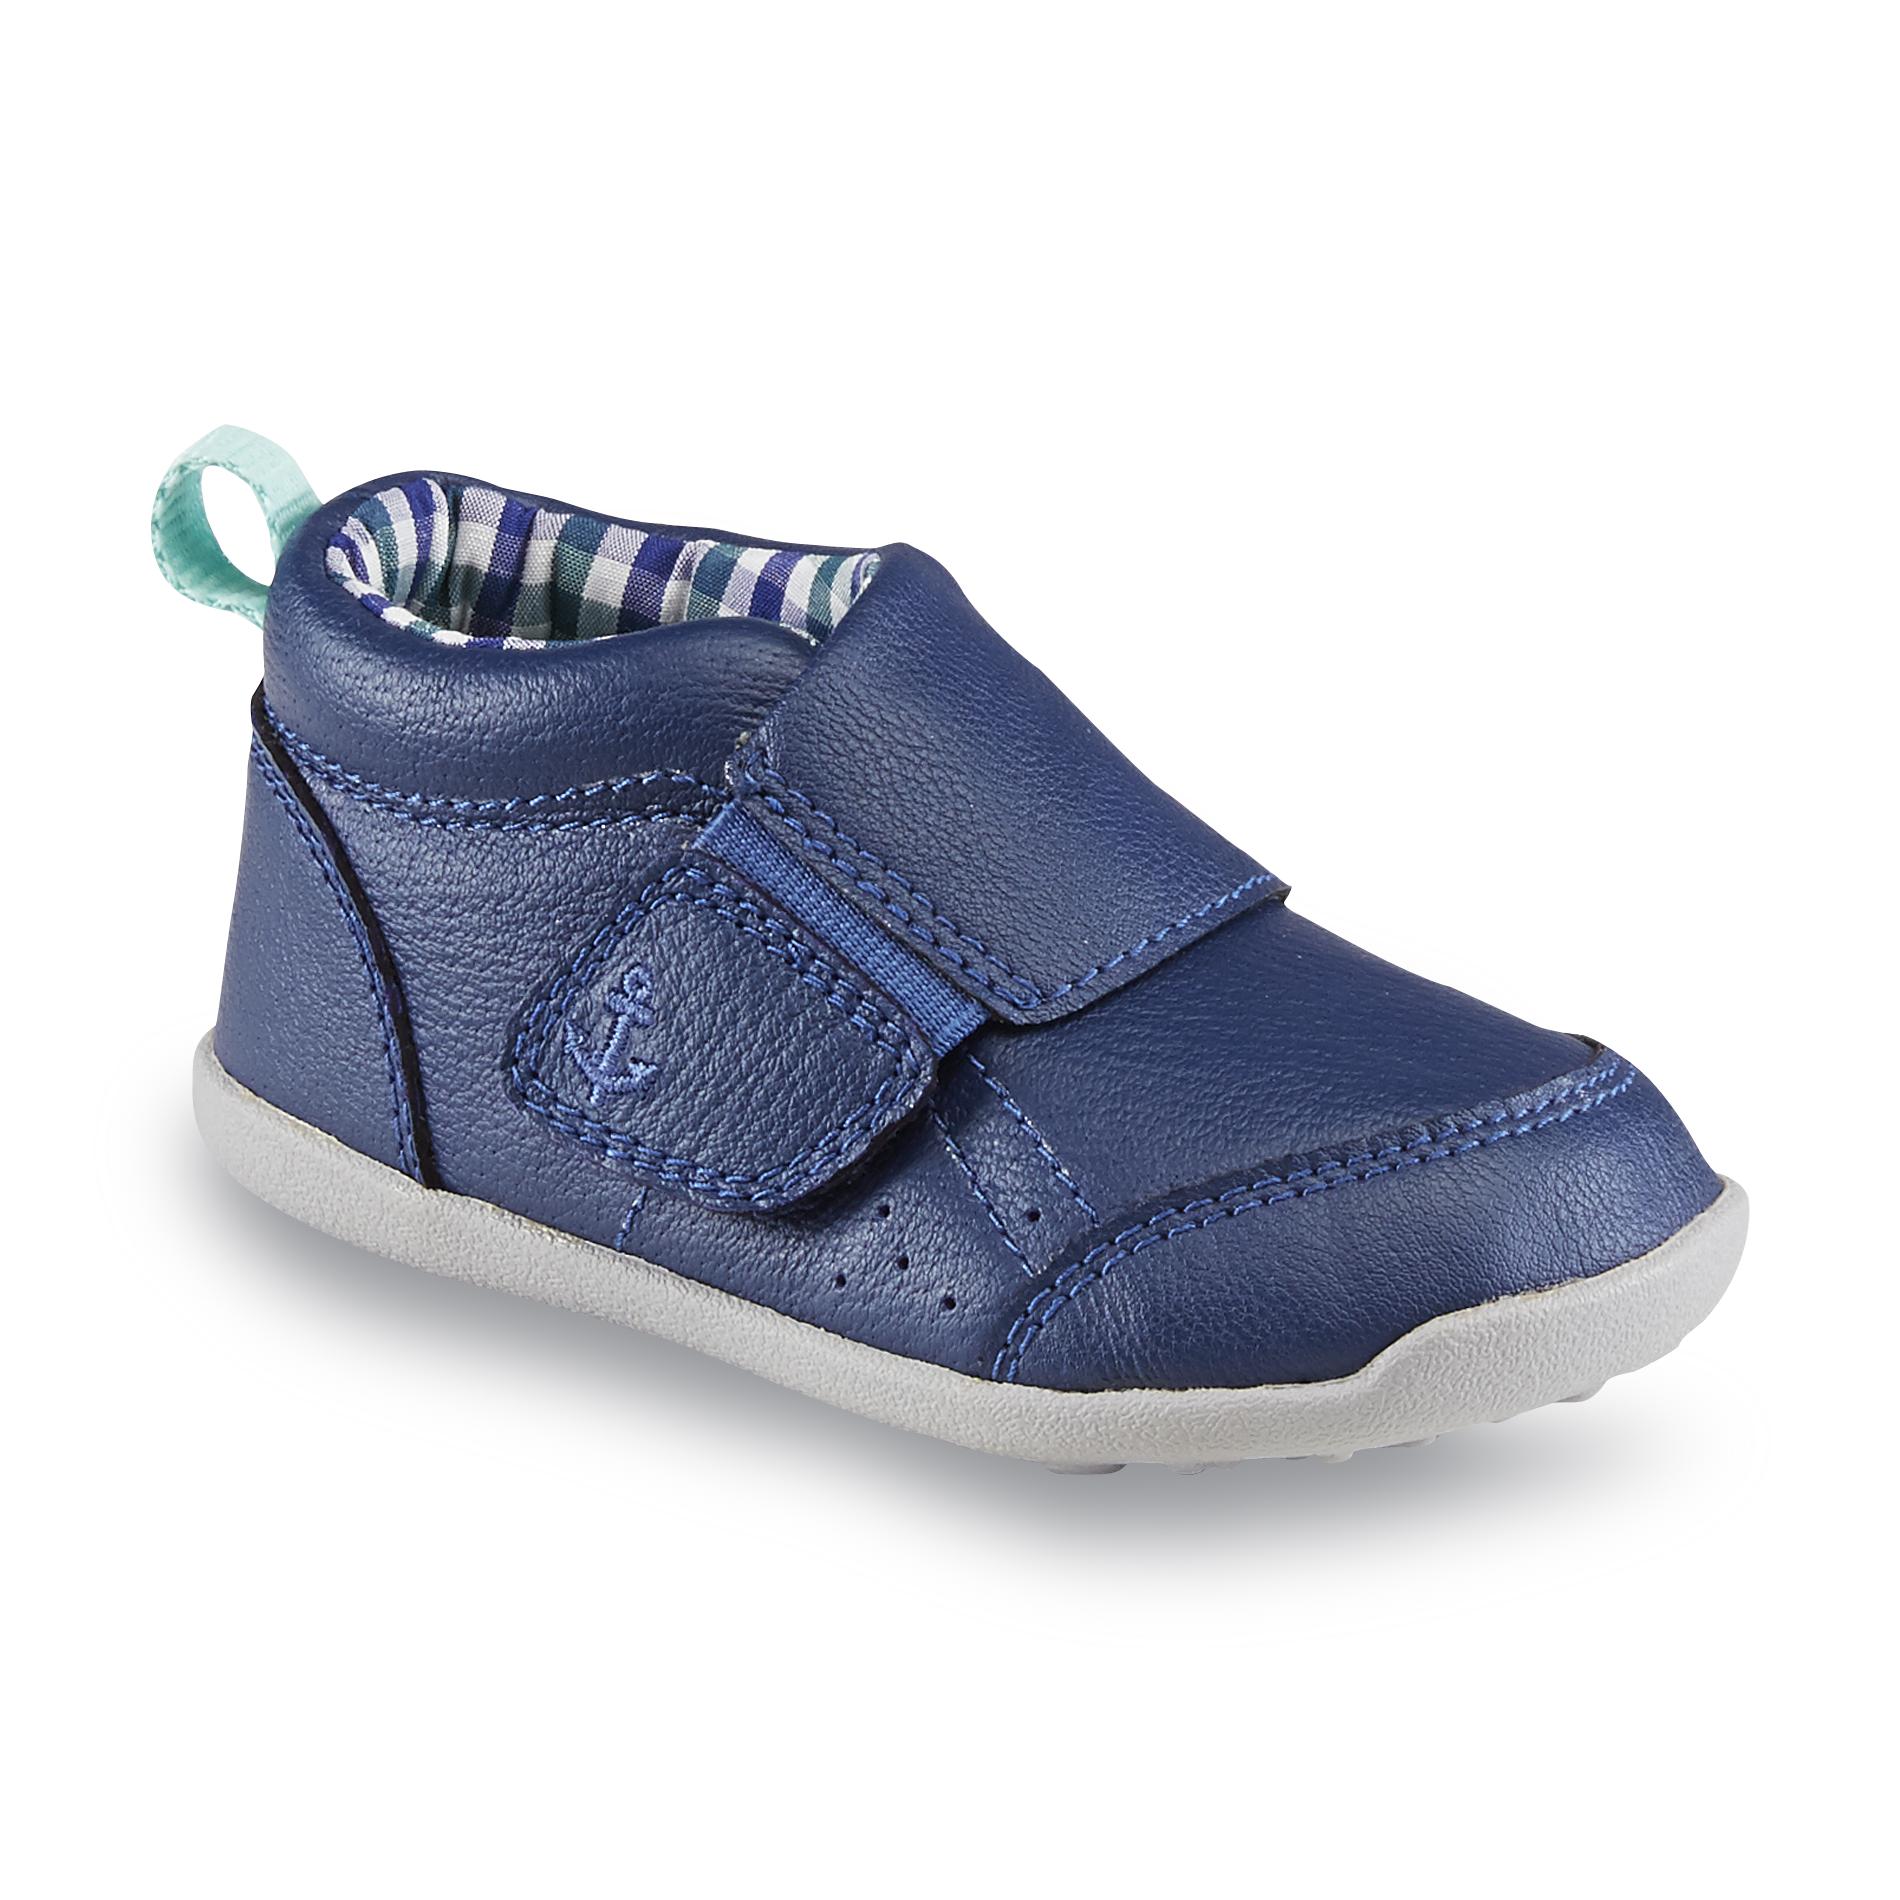 Carter's Every Step Baby Boy's Stage 3 Charlie Walking Shoe Navy Shop Your Way Online